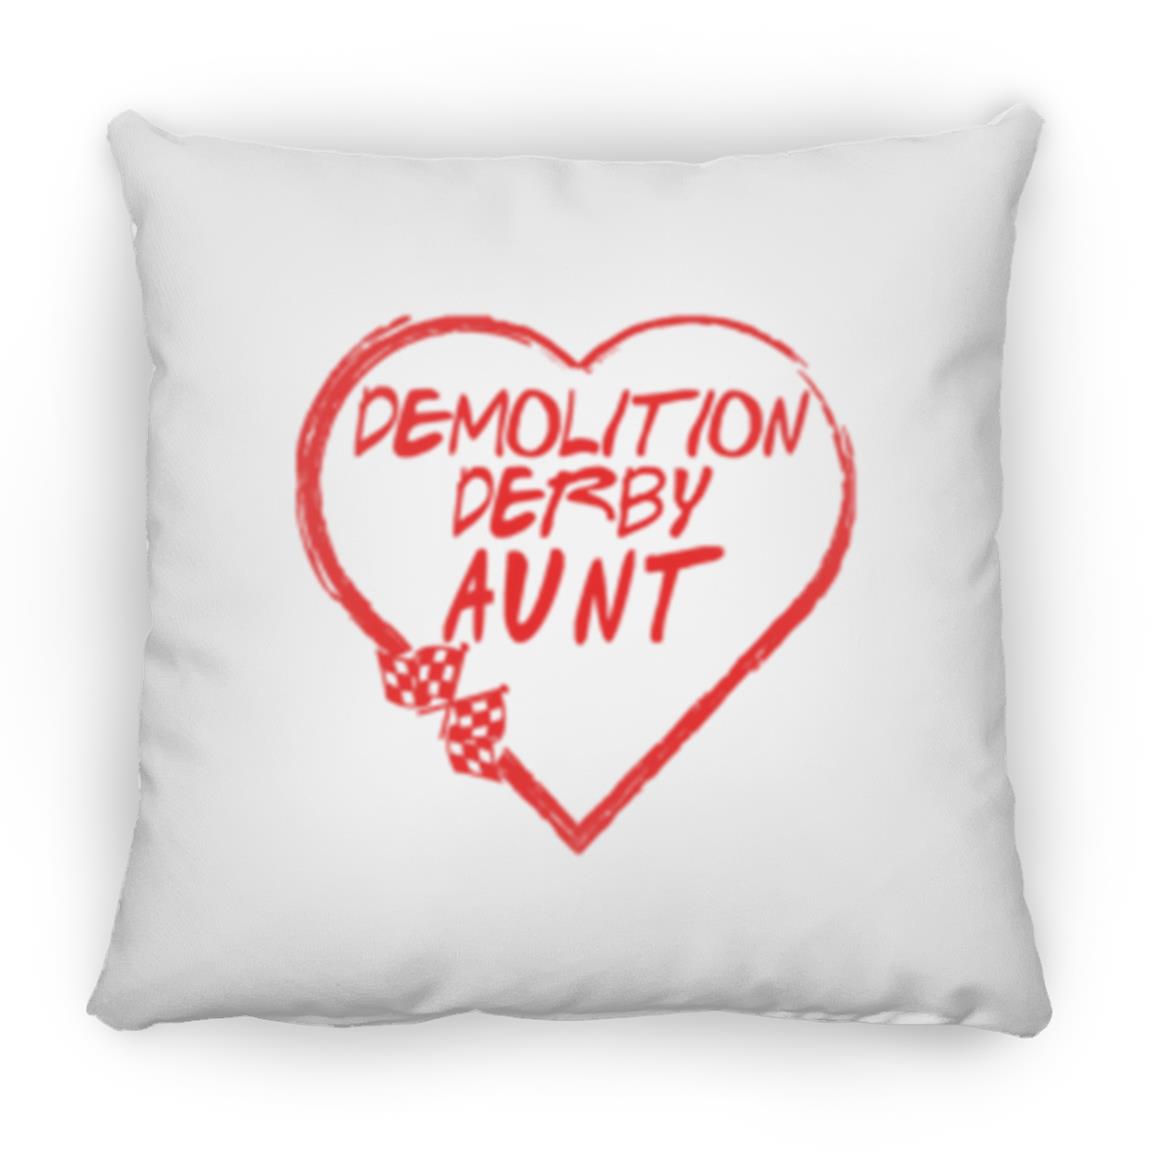 Demolition Derby Aunt Heart Small Square Pillow